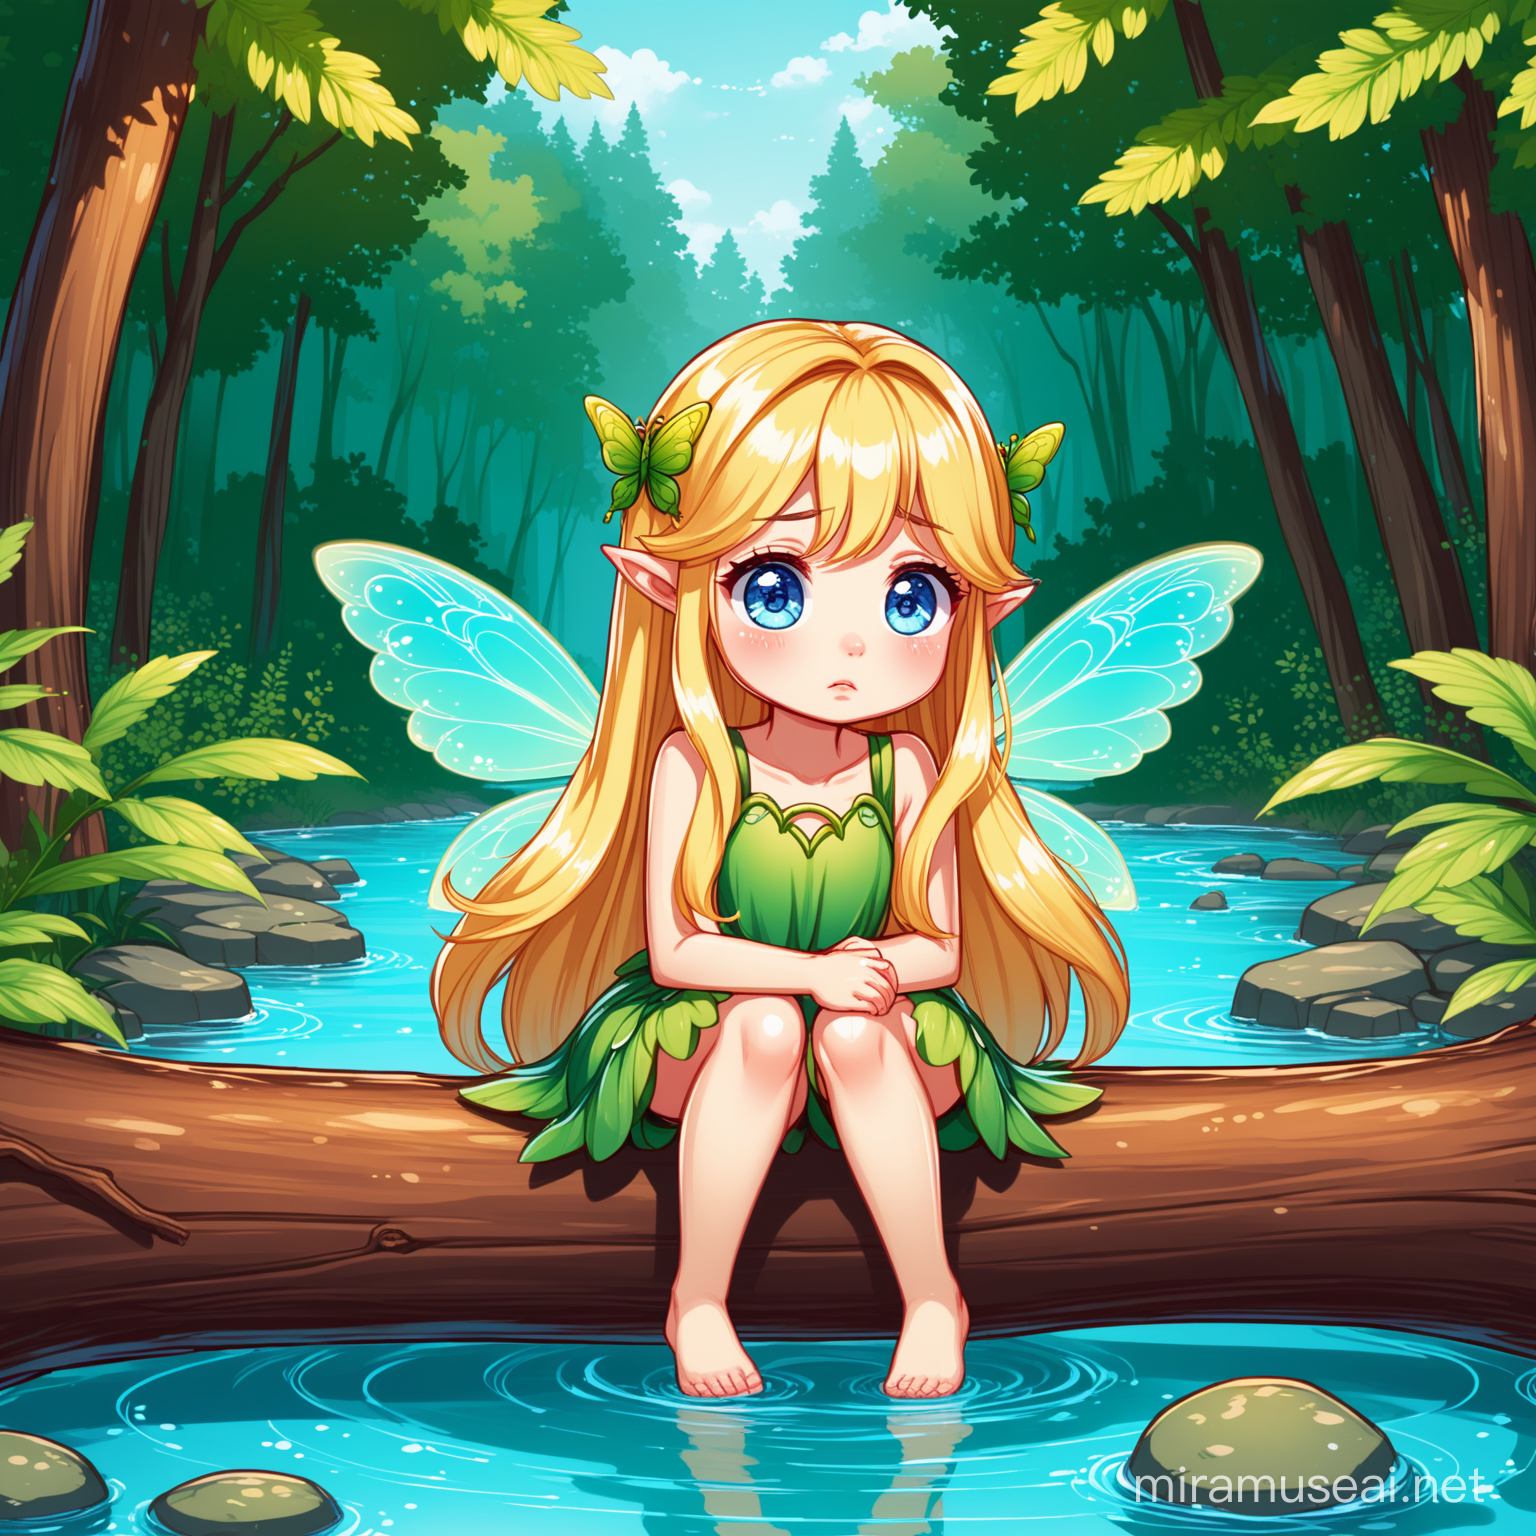 Lonely Forest Fairy Sitting by Creek Small Cartoon Character with Blonde Hair